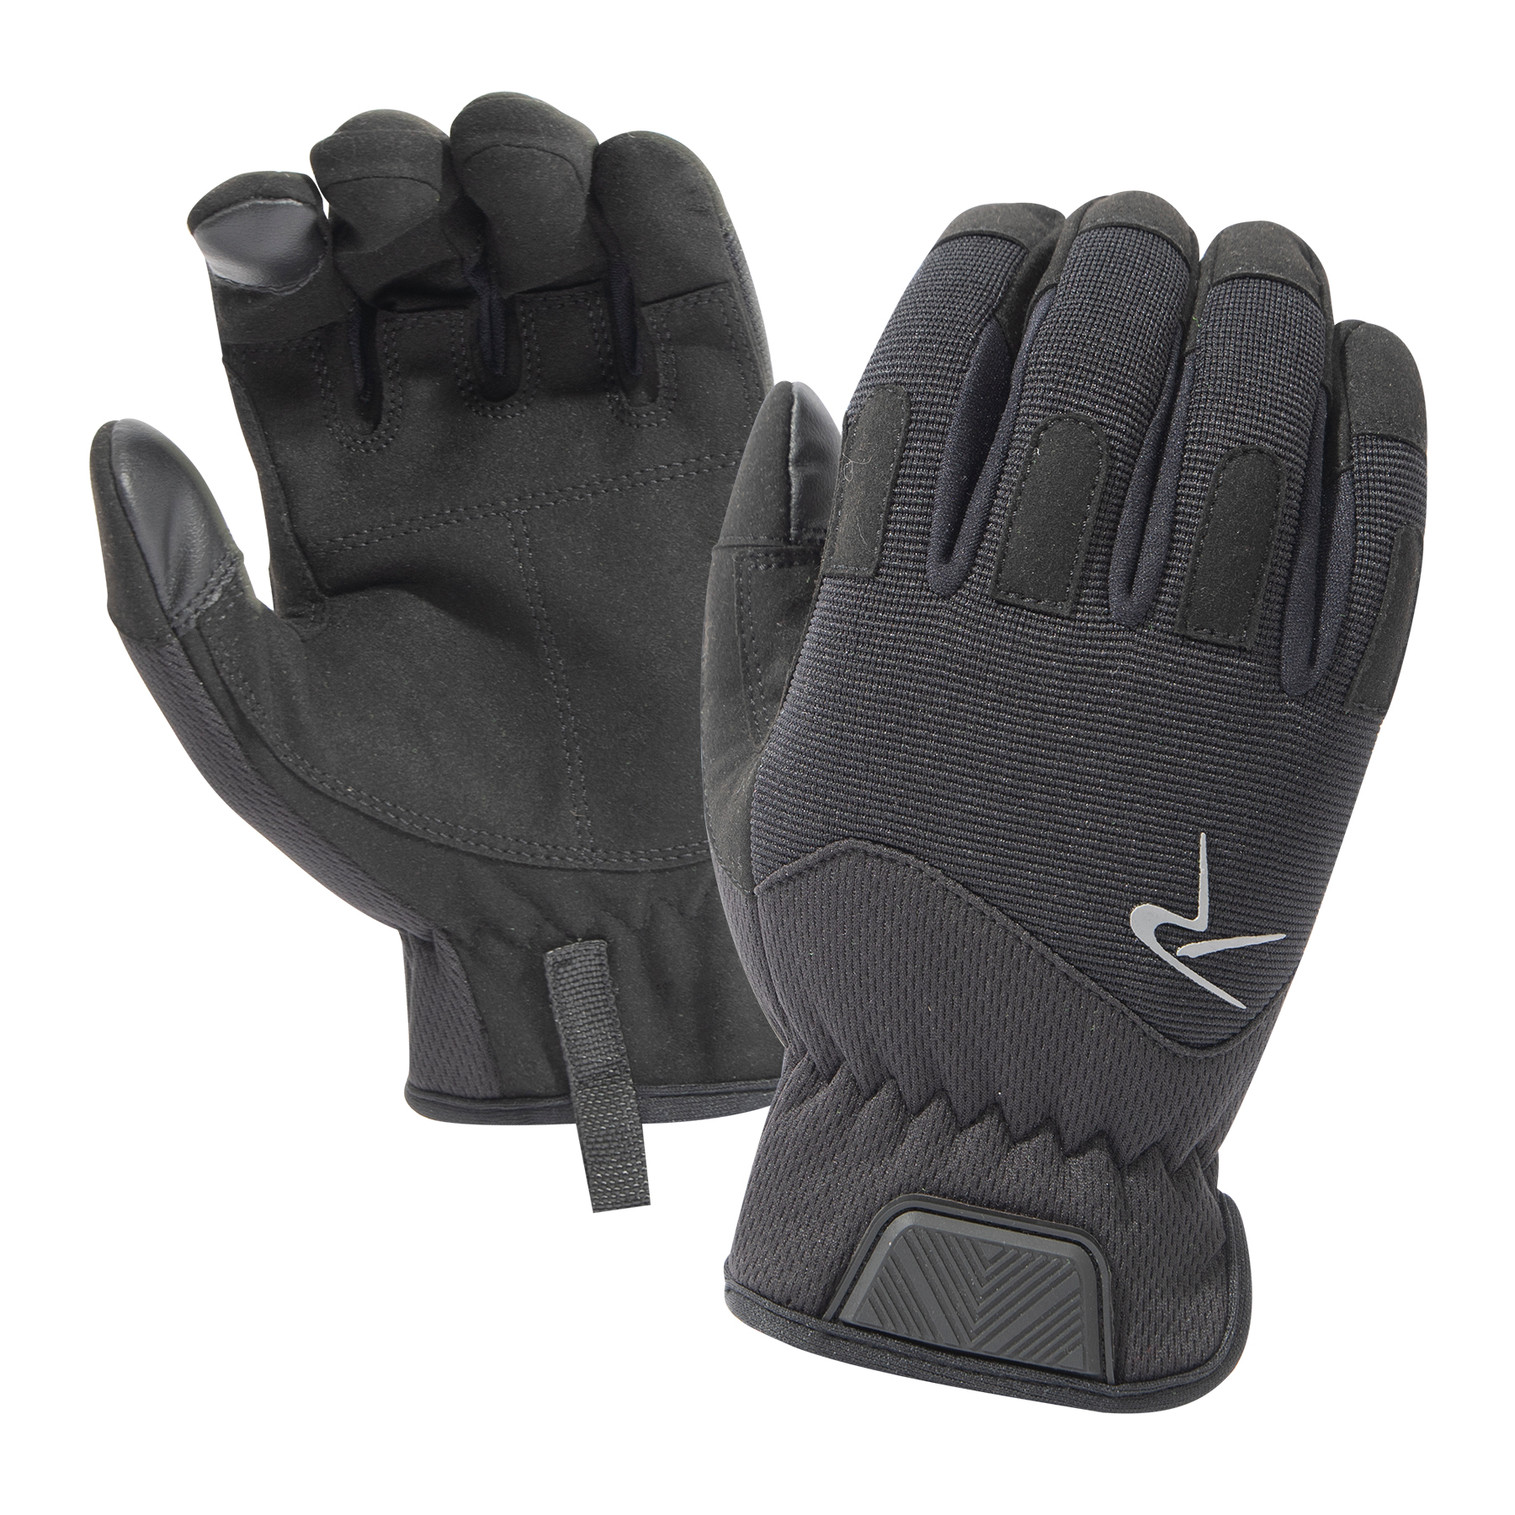 Rothco Rapid Fit Duty Gloves - Black